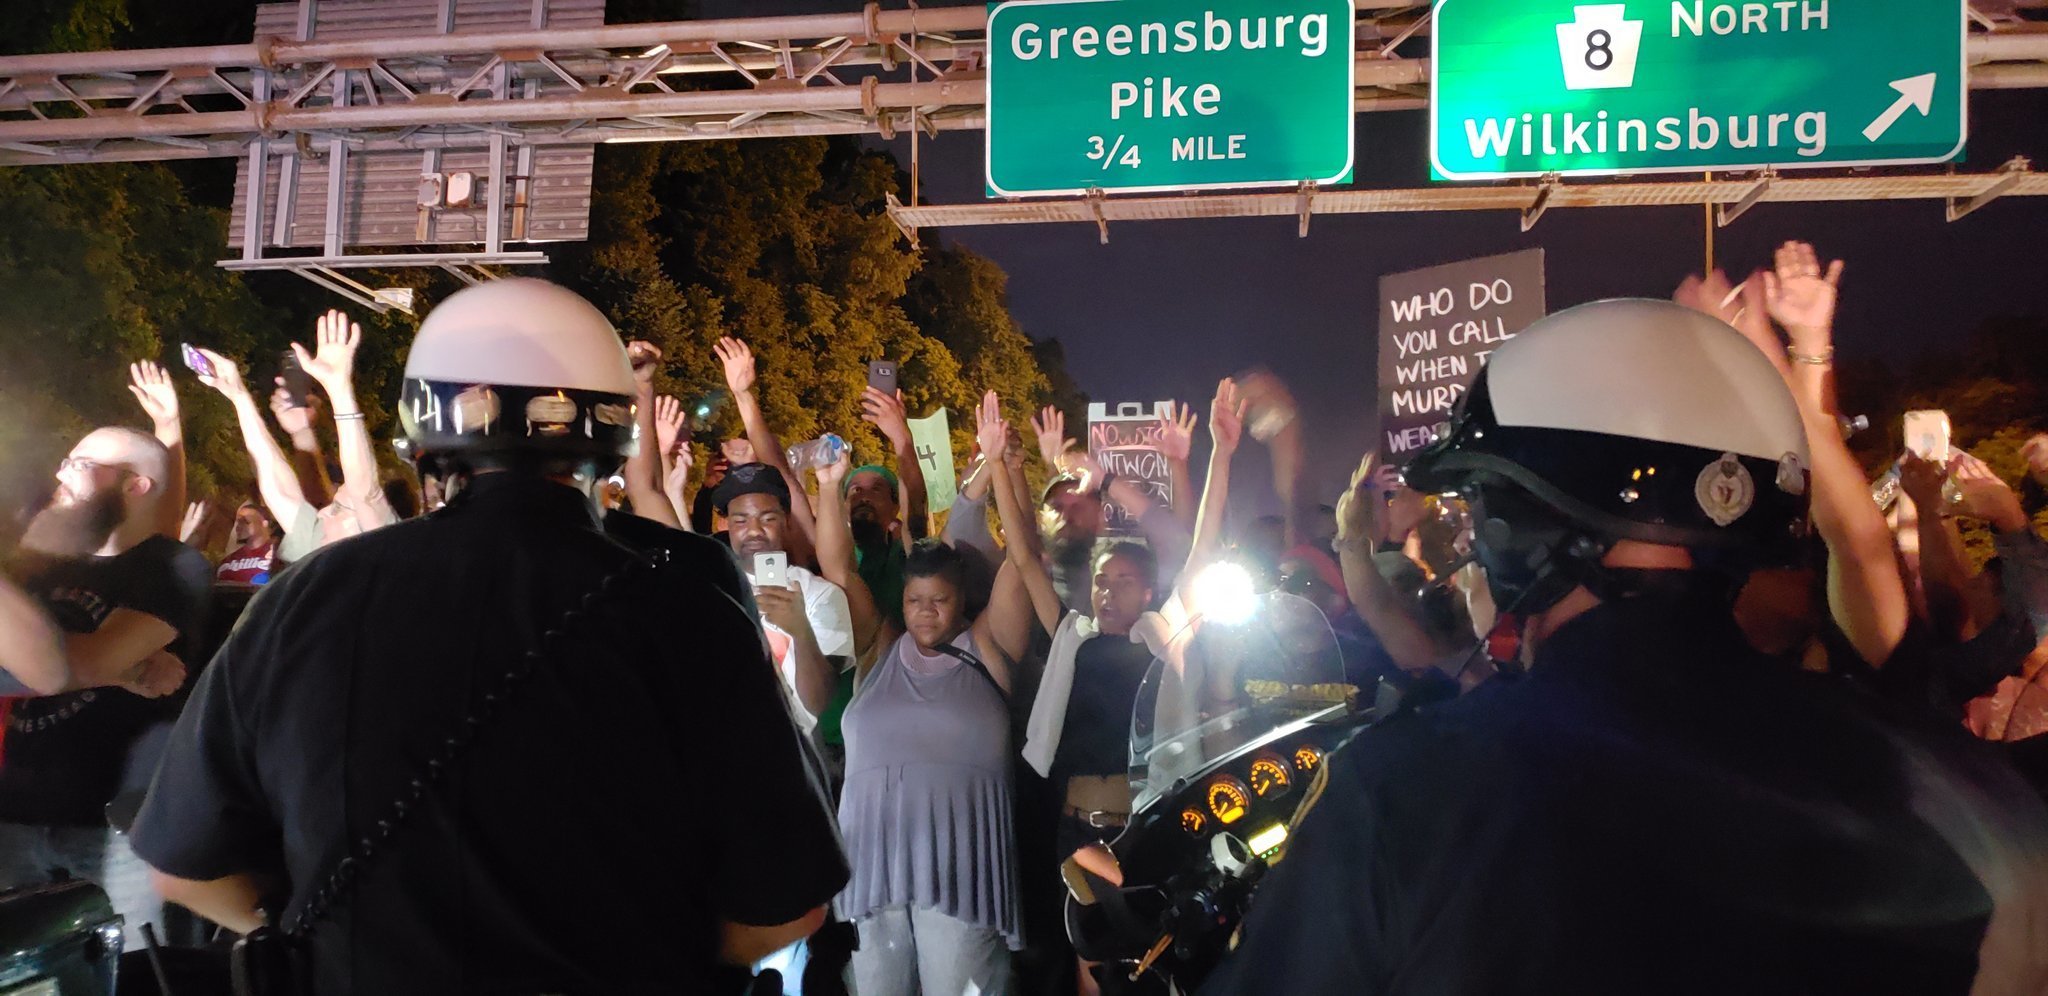 Protesters chant "Hands up! Don't shoot!" at motorcycle officers near the head of a line of vehicles stuck on Interstate 376 in Pittsburgh on Thursday, June 21, 2018.